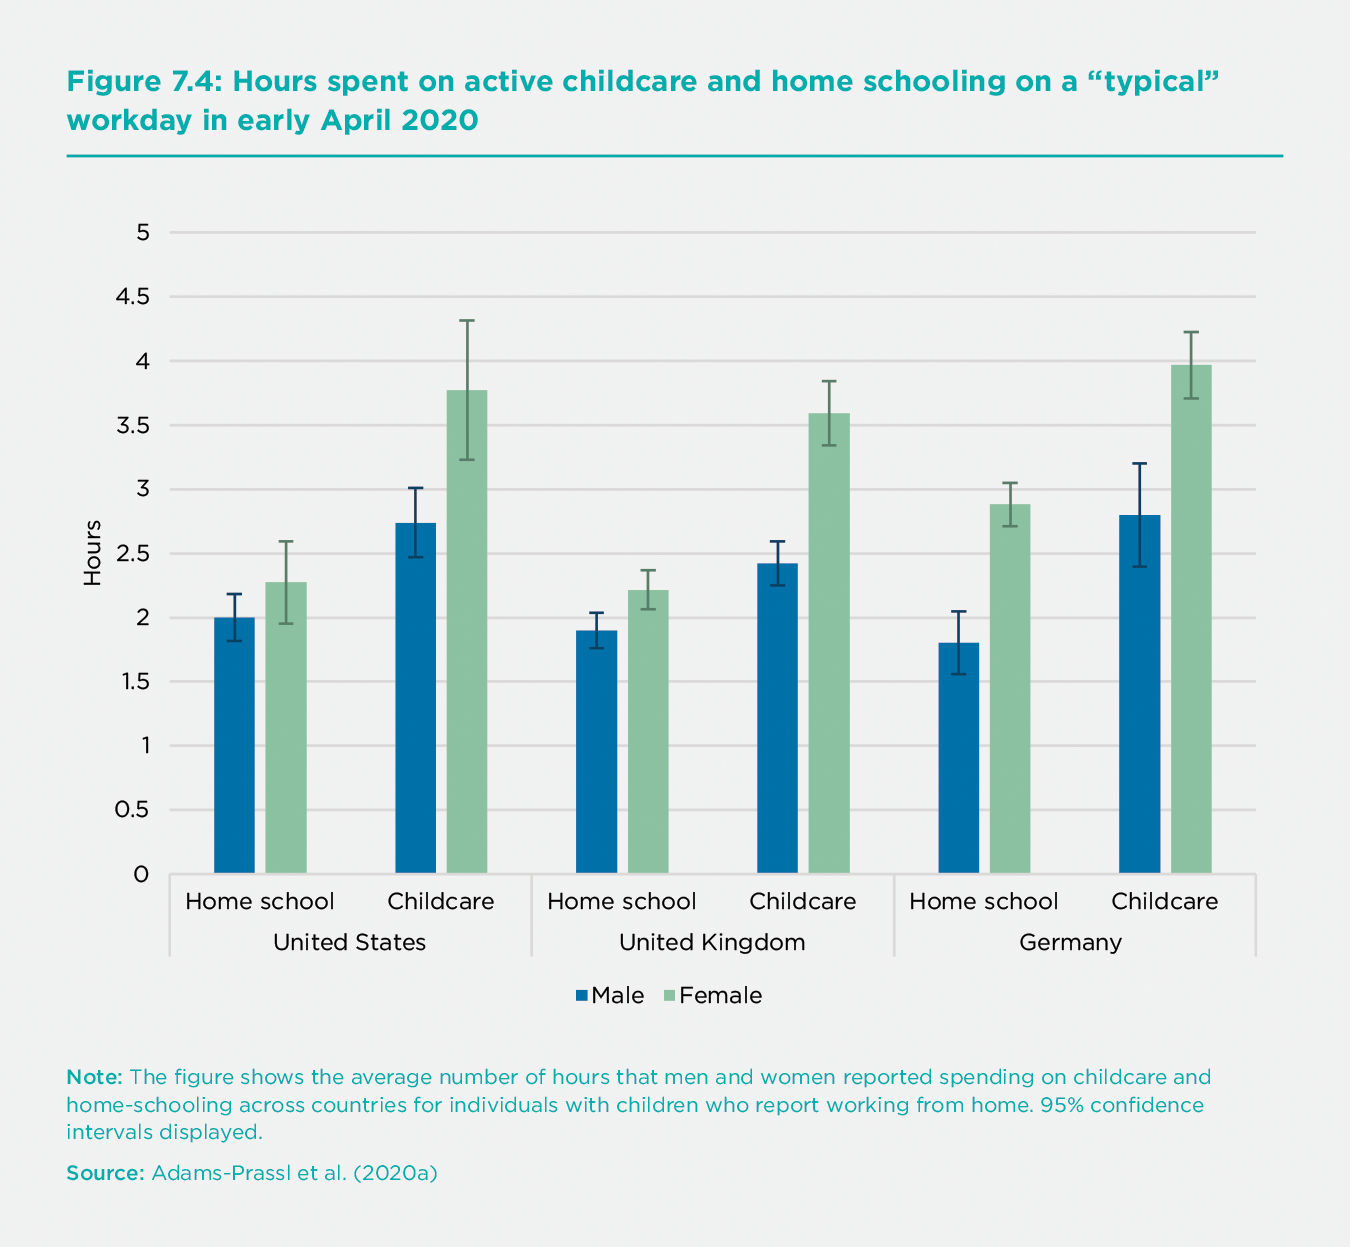 Figure 7.4: Hours spent on active childcare and home schooling on a “typical”workday in early April 2020